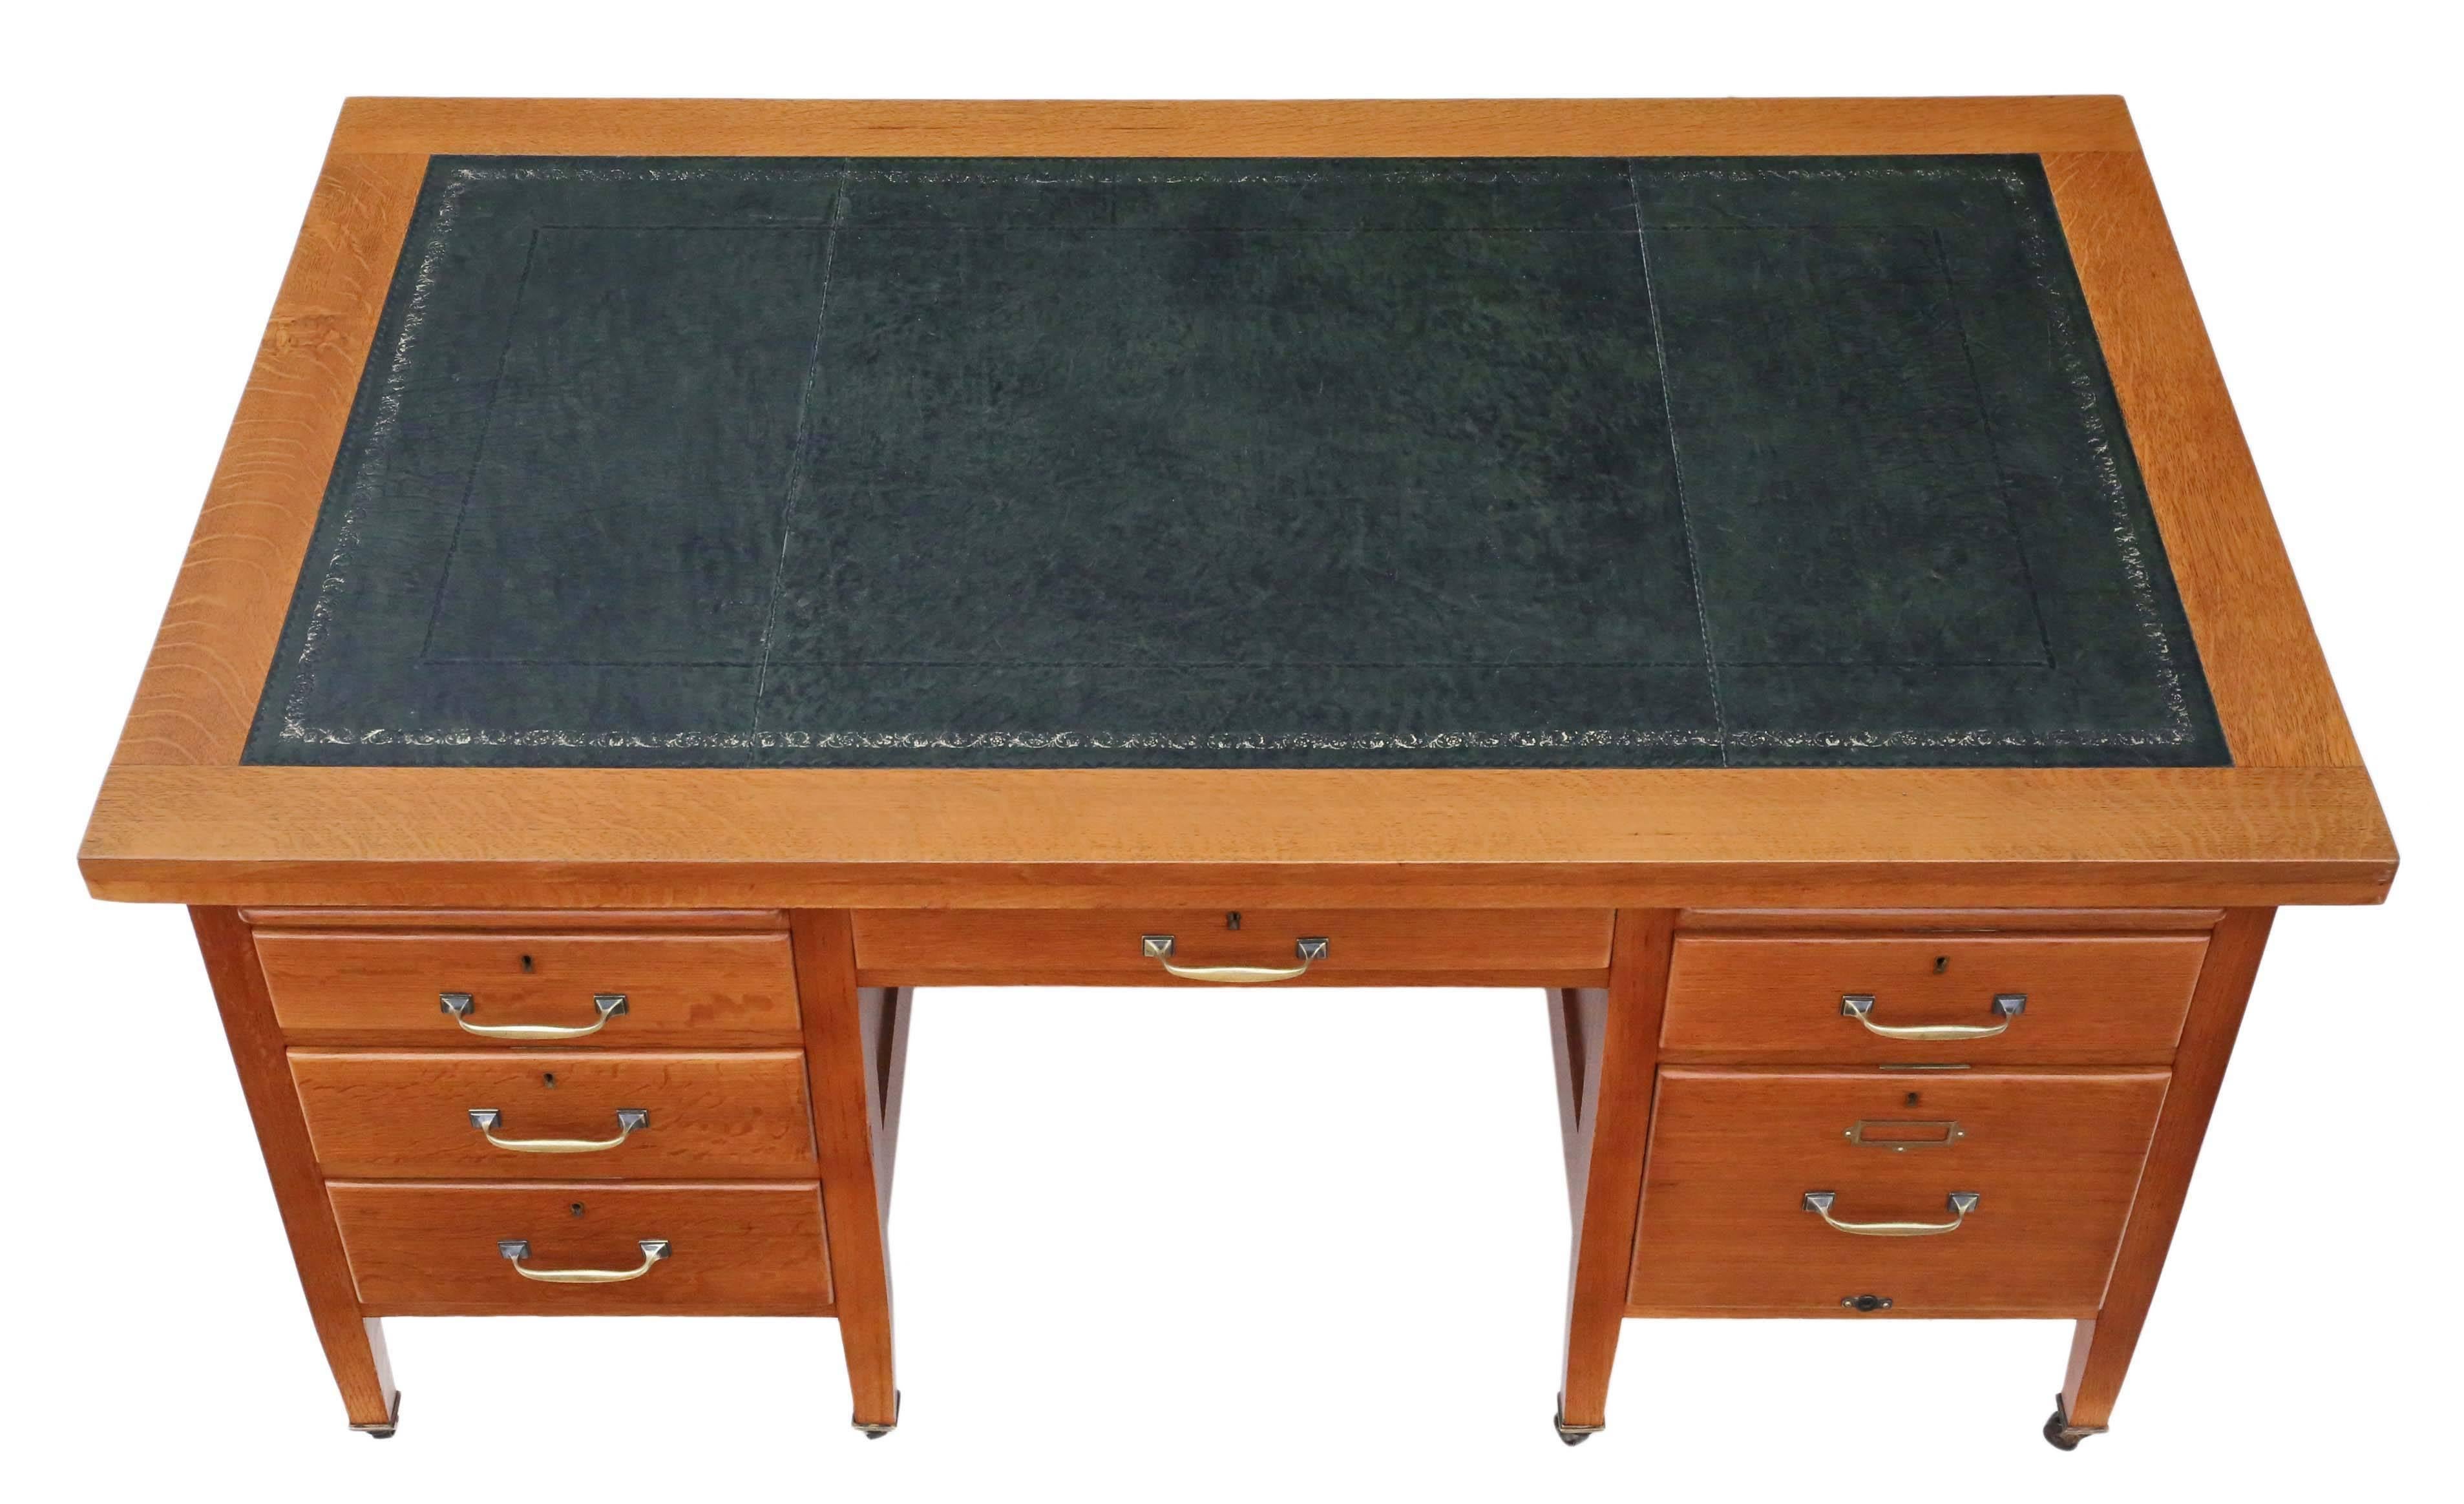 Antique quality large oak twin pedestal desk. Dates from the first half of the 20th century.

Fabulous proportions, color, age and patina. No woodworm.

A very fine quality desk, a rare find, you will not find better! Best craftsmanship and